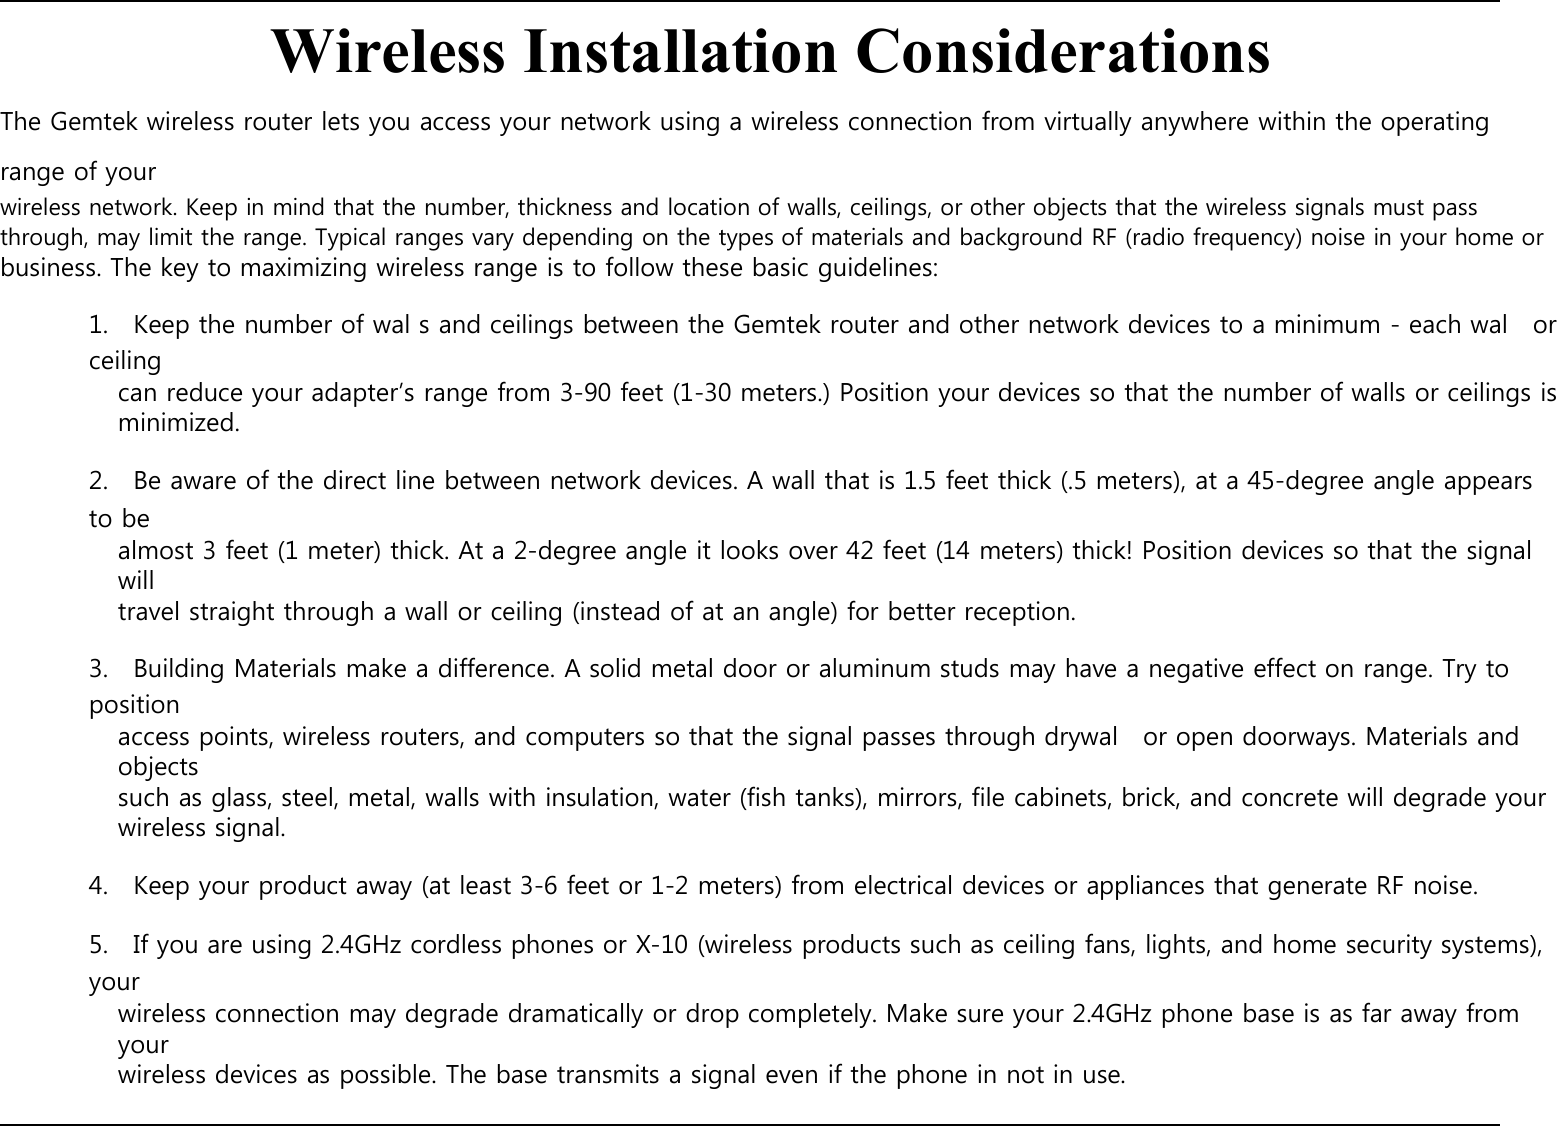    Wireless Installation Considerations The Gemtek wireless router lets you access your network using a wireless connection from virtually anywhere within the operating range of your wireless network. Keep in mind that the number, thickness and location of walls, ceilings, or other objects that the wireless signals must pass through, may limit the range. Typical ranges vary depending on the types of materials and background RF (radio frequency) noise in your home or business. The key to maximizing wireless range is to follow these basic guidelines:  1.    Keep the number of wal s and ceilings between the Gemtek router and other network devices to a minimum - each wal    or ceiling can reduce your adapter’s range from 3-90 feet (1-30 meters.) Position your devices so that the number of walls or ceilings is minimized.  2.    Be aware of the direct line between network devices. A wall that is 1.5 feet thick (.5 meters), at a 45-degree angle appears to be almost 3 feet (1 meter) thick. At a 2-degree angle it looks over 42 feet (14 meters) thick! Position devices so that the signal will travel straight through a wall or ceiling (instead of at an angle) for better reception.  3.    Building Materials make a difference. A solid metal door or aluminum studs may have a negative effect on range. Try to position access points, wireless routers, and computers so that the signal passes through drywal    or open doorways. Materials and objects such as glass, steel, metal, walls with insulation, water (fish tanks), mirrors, file cabinets, brick, and concrete will degrade your wireless signal.  4.    Keep your product away (at least 3-6 feet or 1-2 meters) from electrical devices or appliances that generate RF noise.  5.    If you are using 2.4GHz cordless phones or X-10 (wireless products such as ceiling fans, lights, and home security systems), your wireless connection may degrade dramatically or drop completely. Make sure your 2.4GHz phone base is as far away from your wireless devices as possible. The base transmits a signal even if the phone in not in use.         